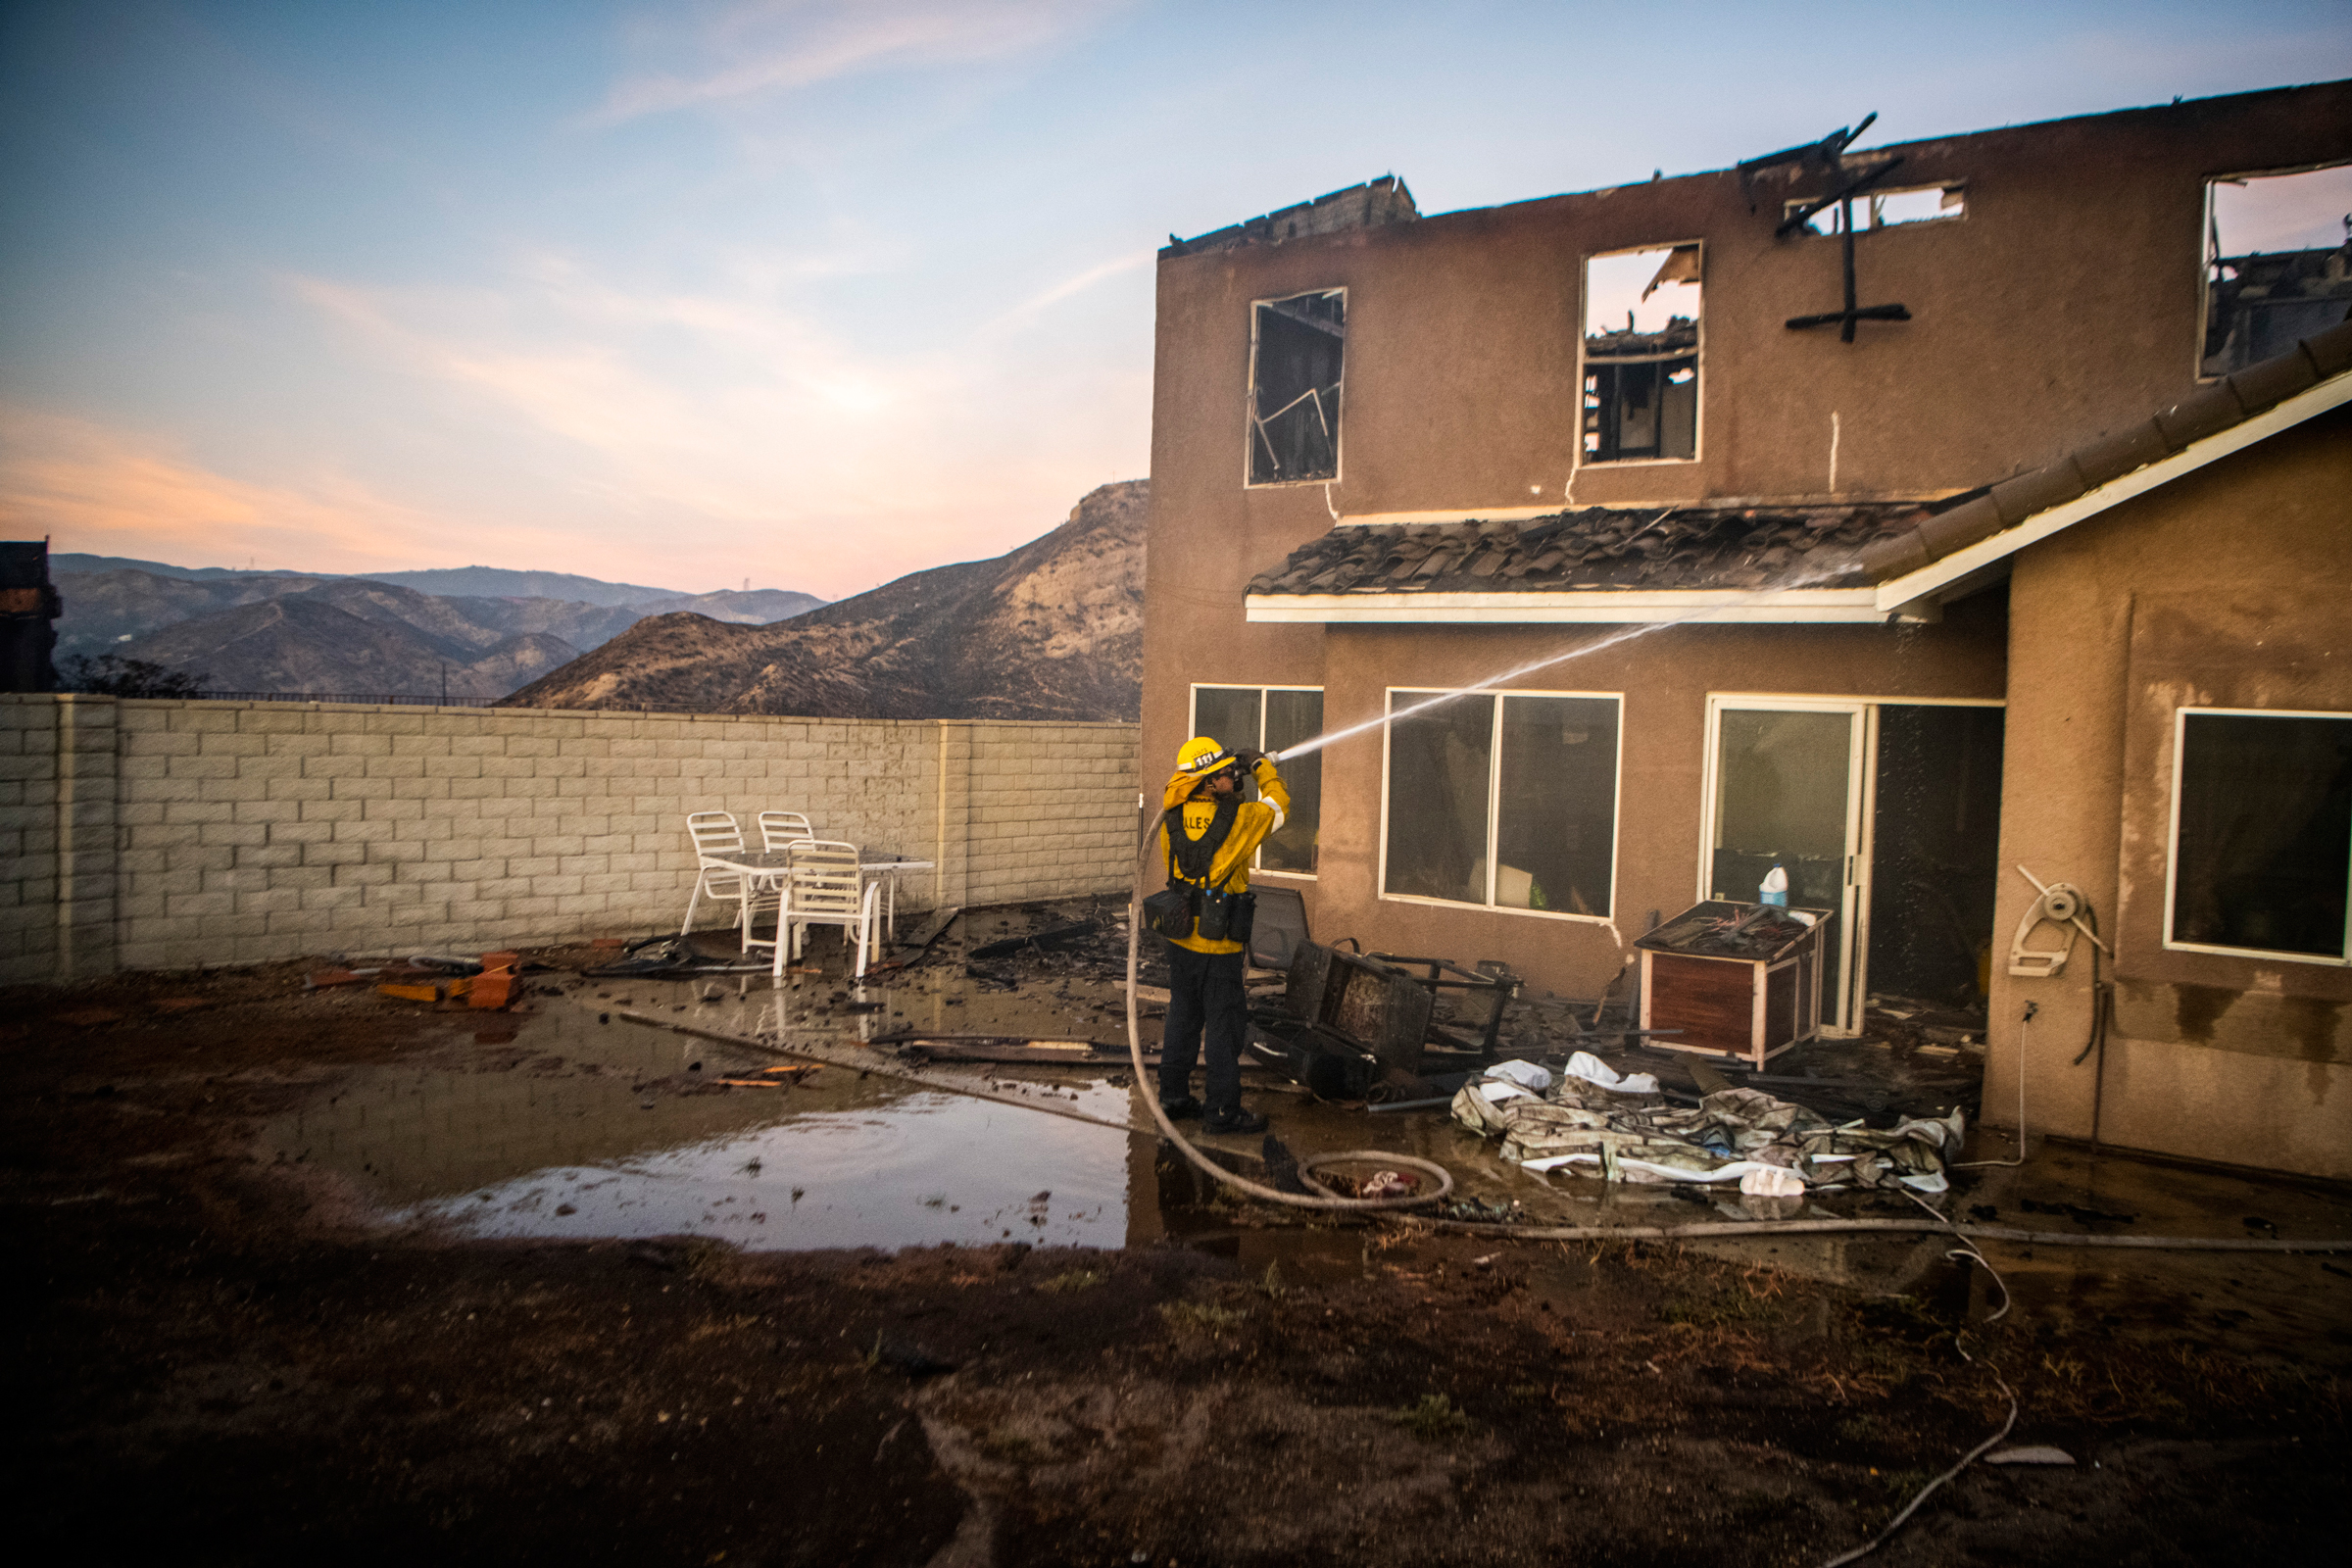 A firefighter hoses down a damaged house as the Tick Fire burns in the Santa Clarita, Calif., area on Oct. 24, 2019. (Stuart W. Palley)